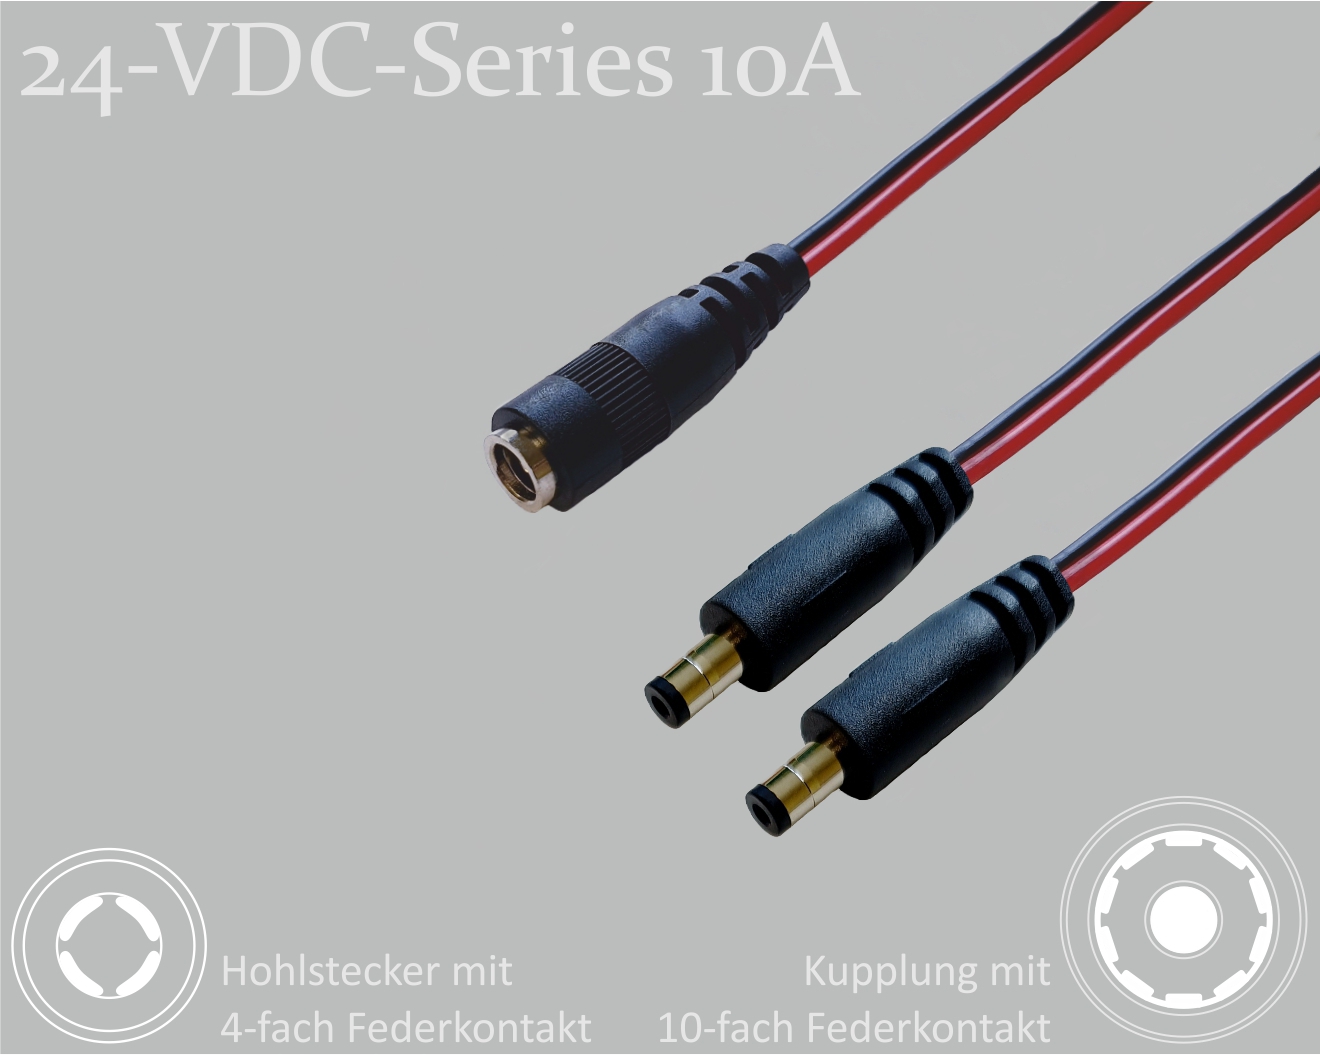 24-VDC-Series 10A, DC distributor 1x DC coupling with 10-spring contact to 2x DC plug with 4-spring contact, 2.1x5.5mm, flat cable 2x0.75mm², red/black, 0.3m